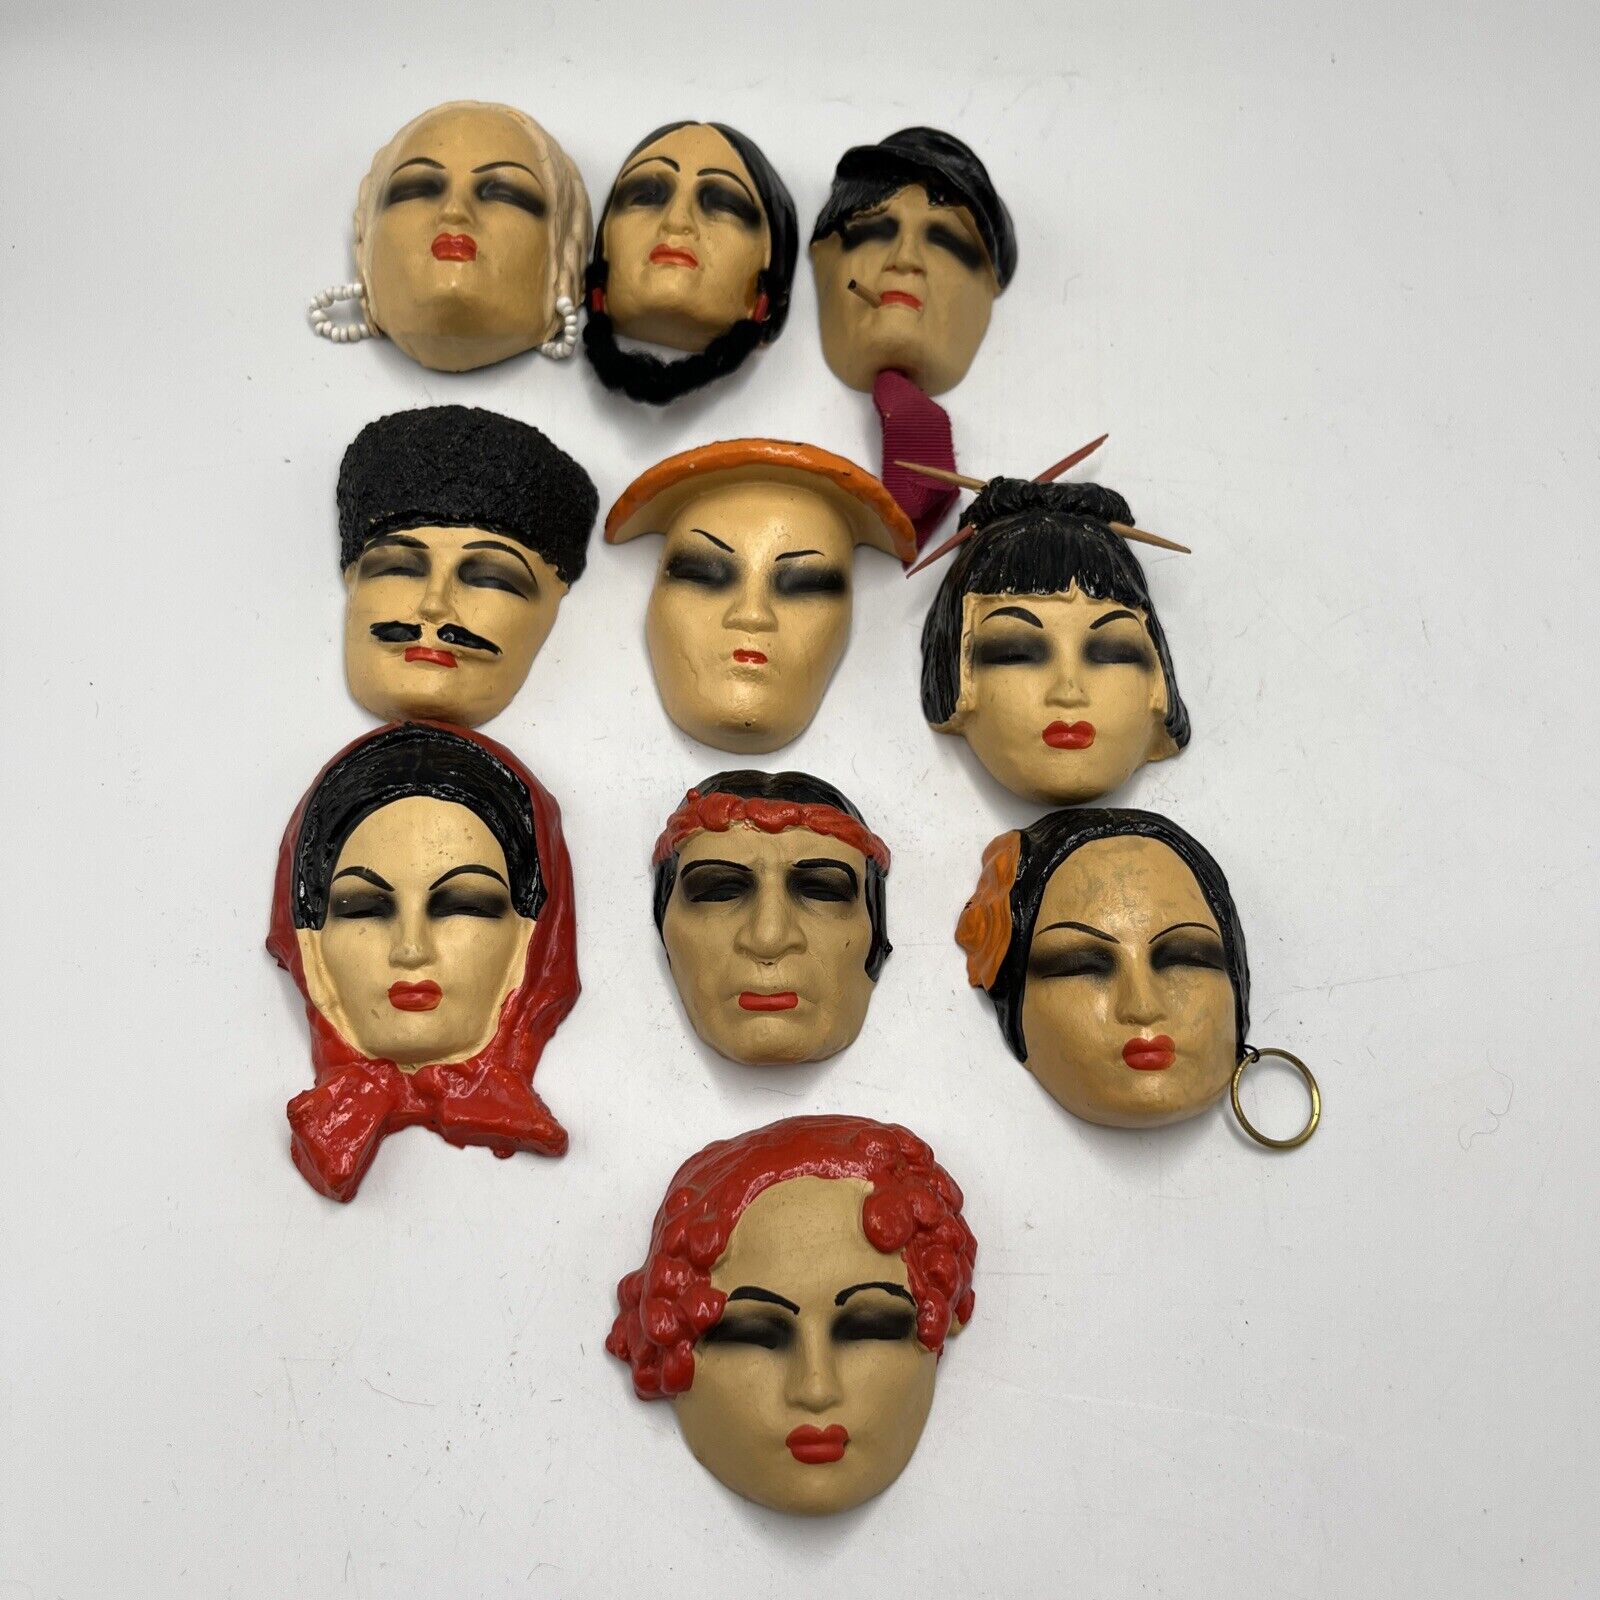 VTG 1930s Hand Painted Miniature Masks - LOT OF 10 - Extremely Rare